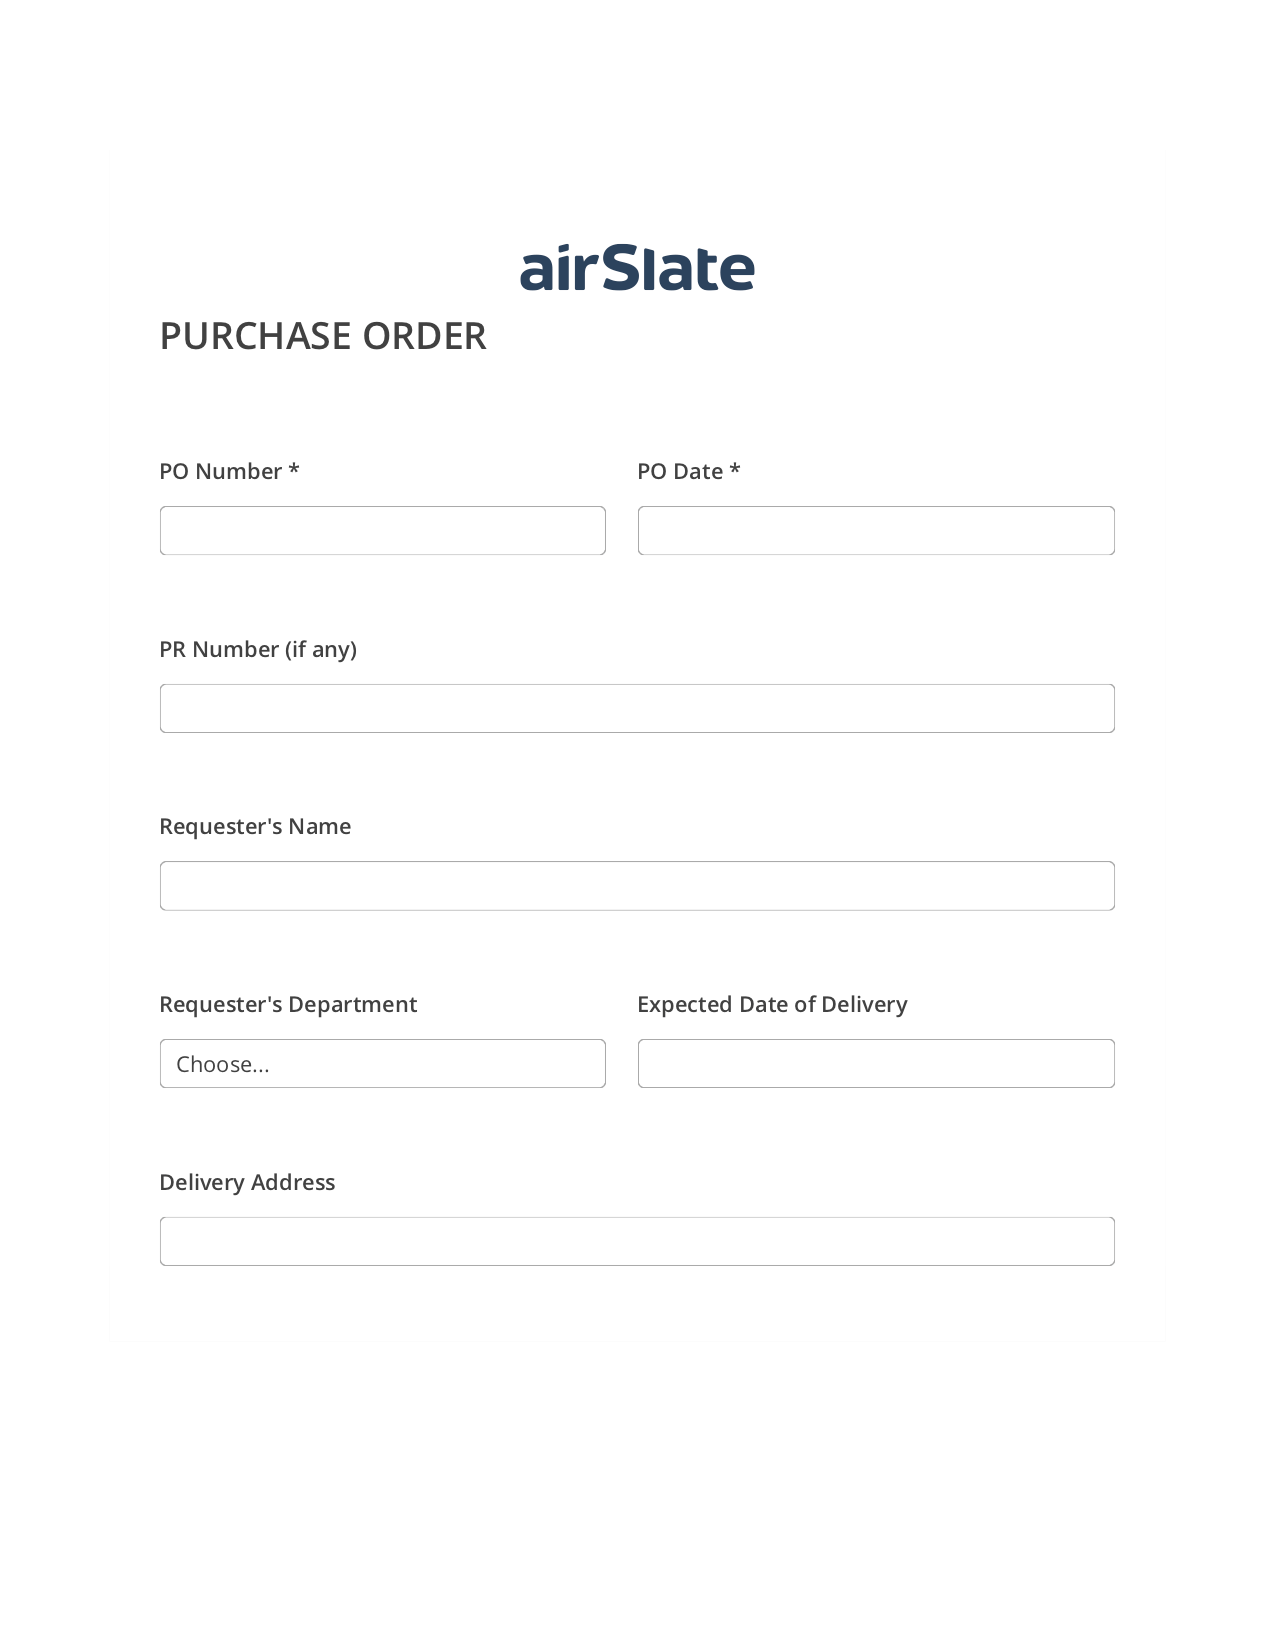 Item Purchase Order Flow Email Notification Bot